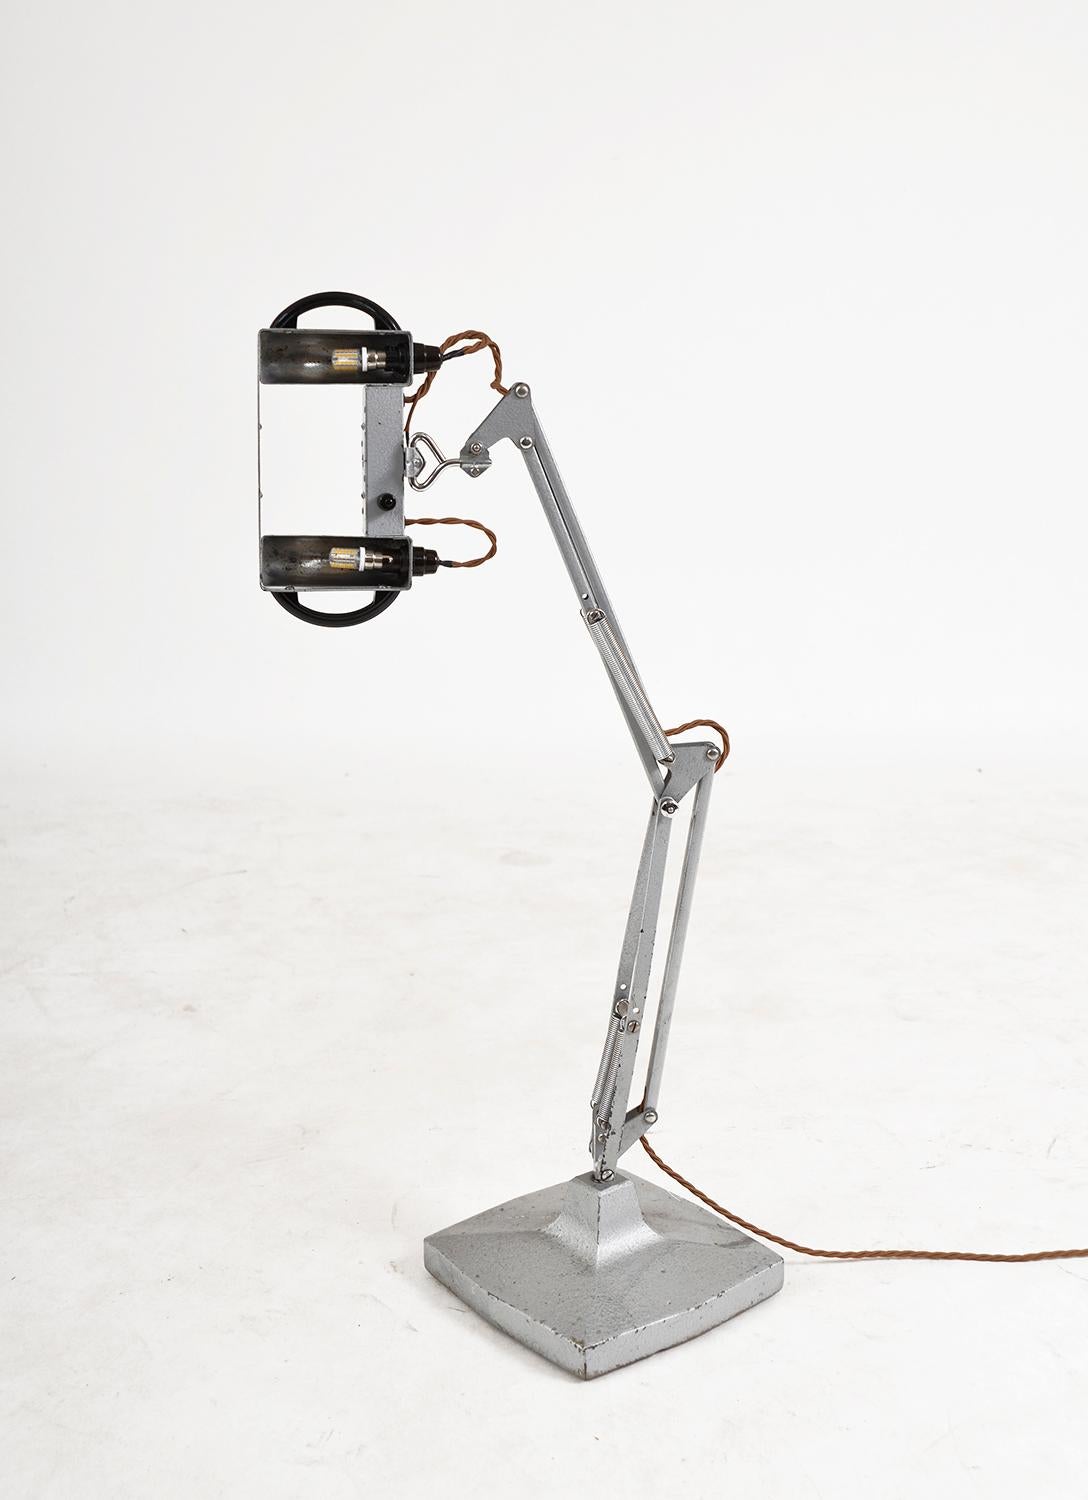 anglepoise magnifying lamp